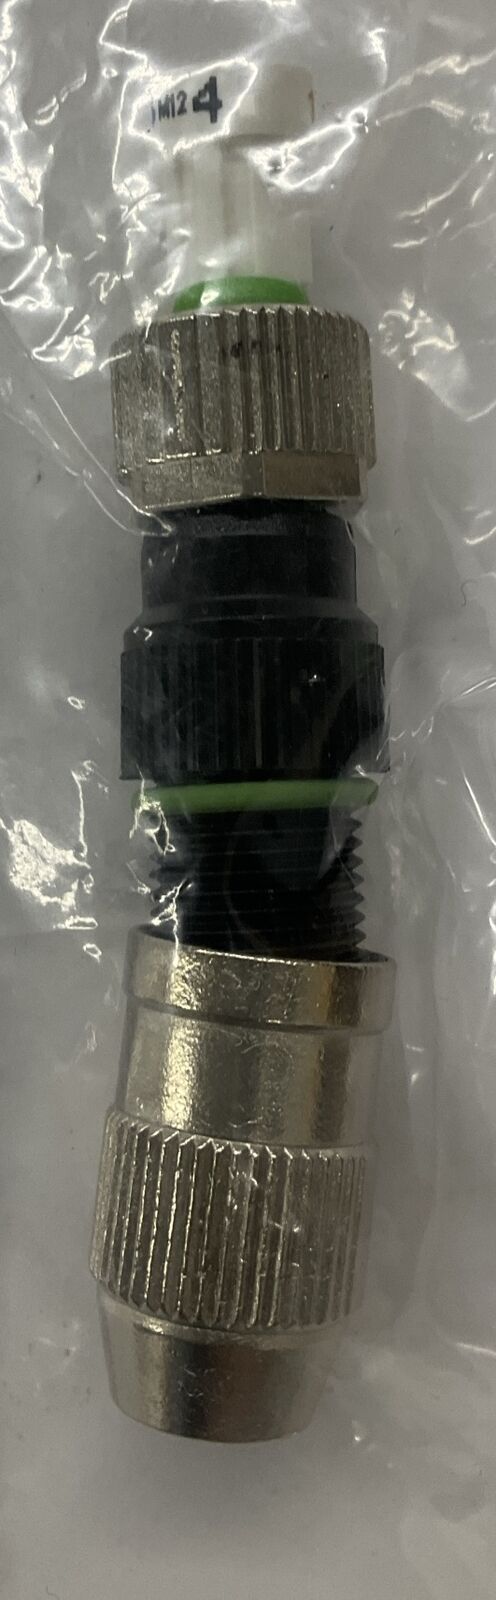 Murr 7000-12601-0000000  M12 4-Pin Field Wireable Connector (CL241)